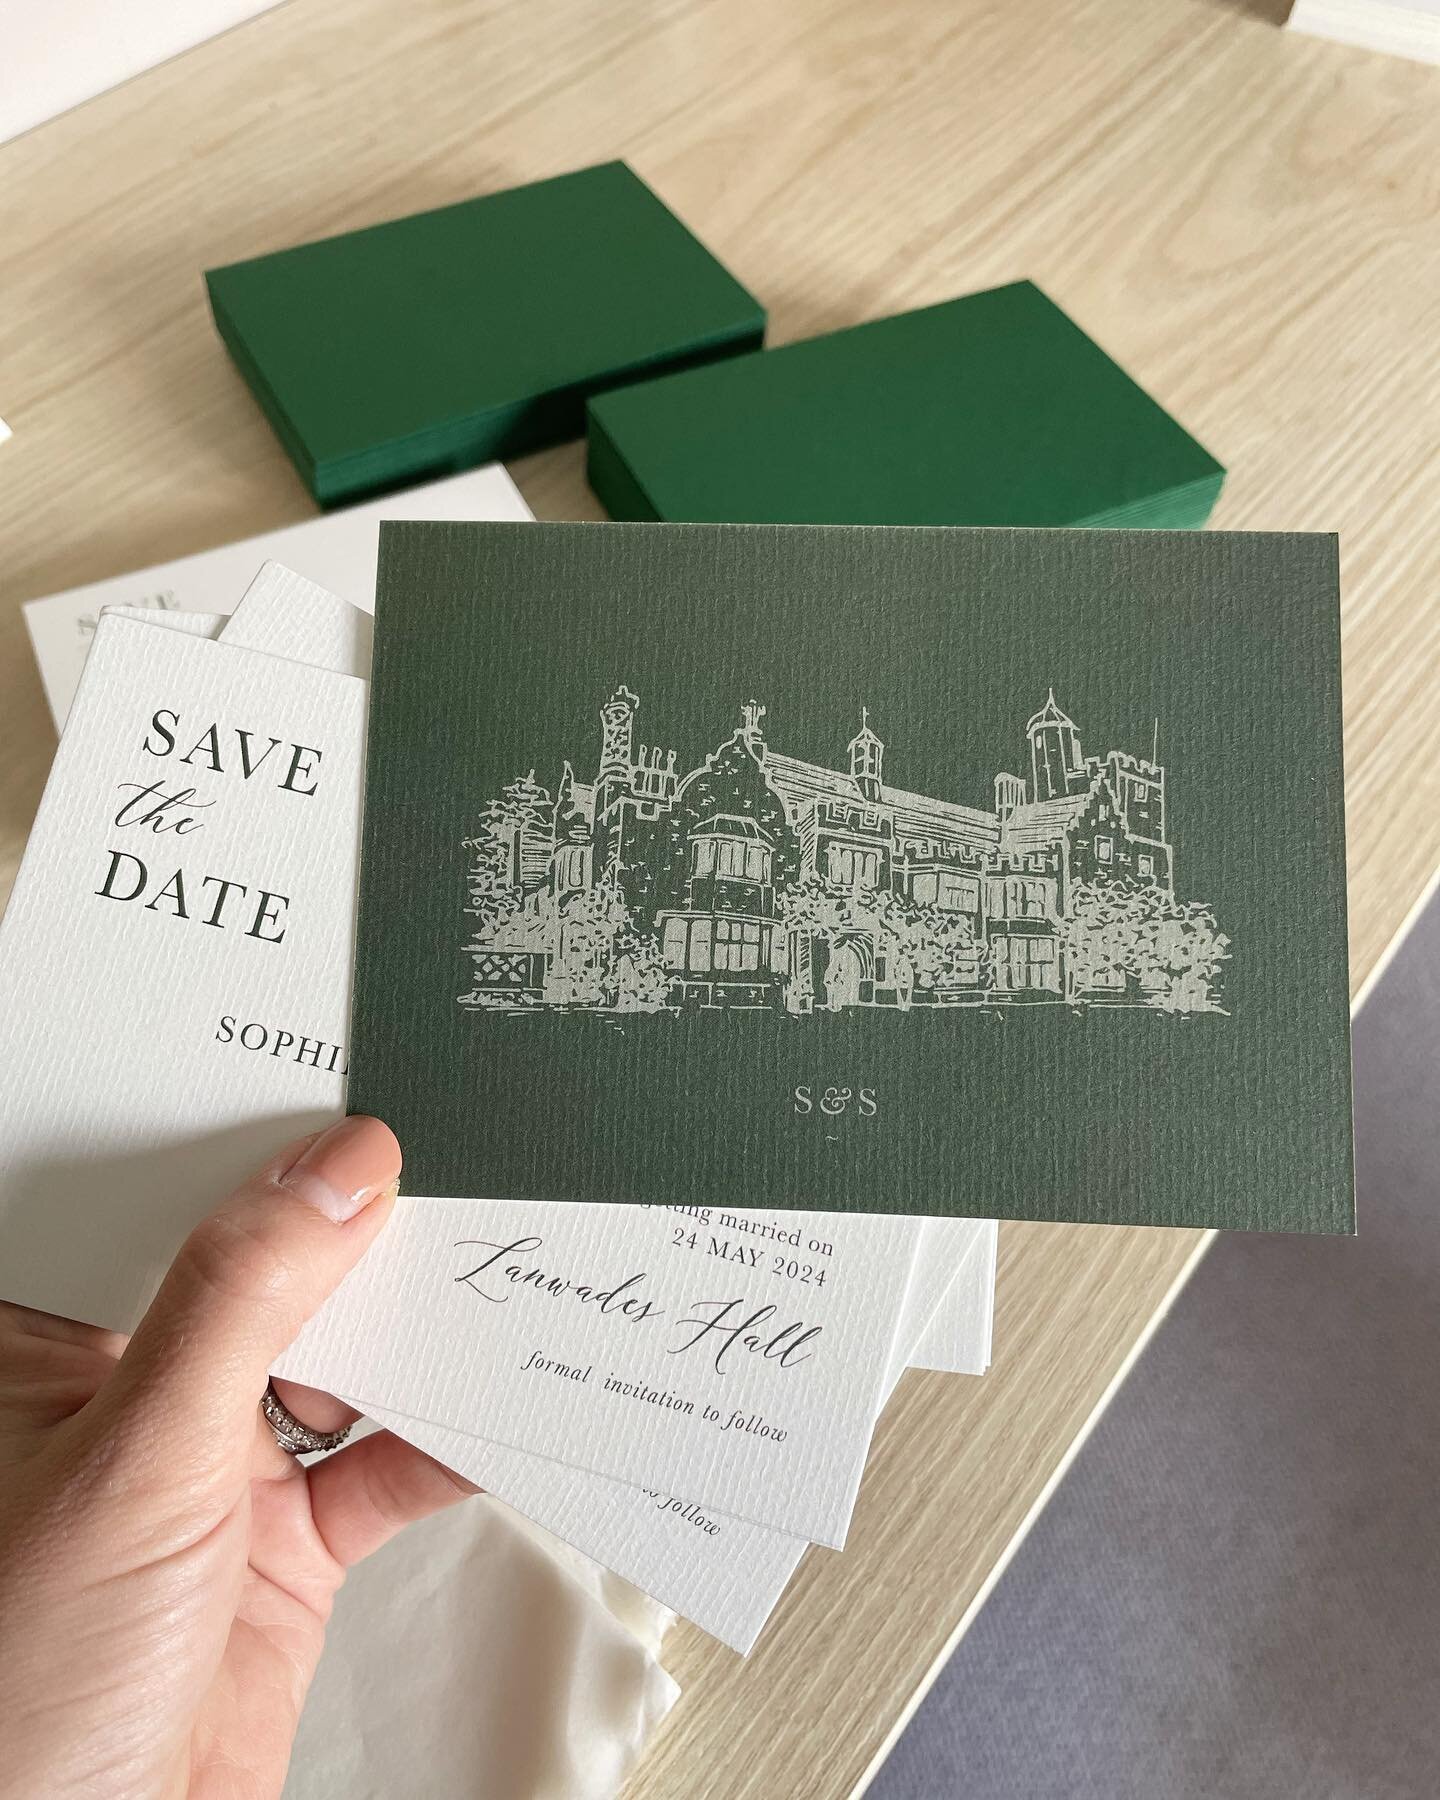 Parcelling up these beauts to go out today ~ Marlie save the dates in forest green with matching envelopes. Hand drawn illustration of @lanwadeshall featuring on the reverse.
&bull;
#handdrawn #venuesketch #venueportrait #venue #venueillustration #fo